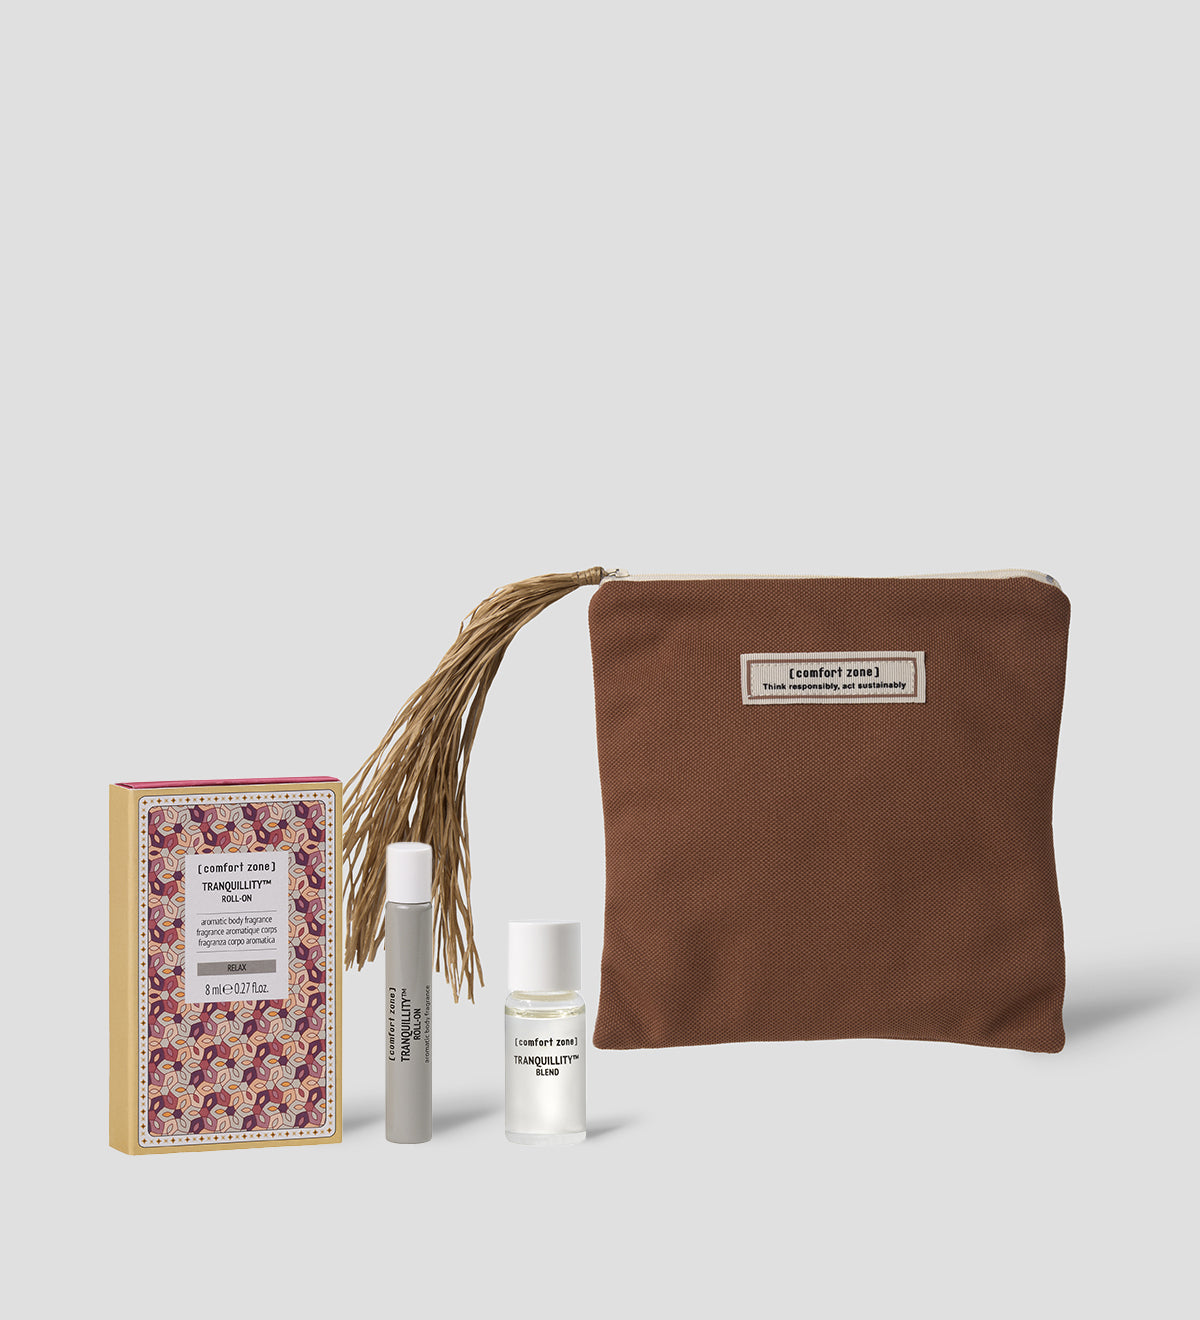 Comfort Zone: TRANQUILLITY&amp;#8482; AROMATIC KIT Kit corpo aromatico con pouch<br>-